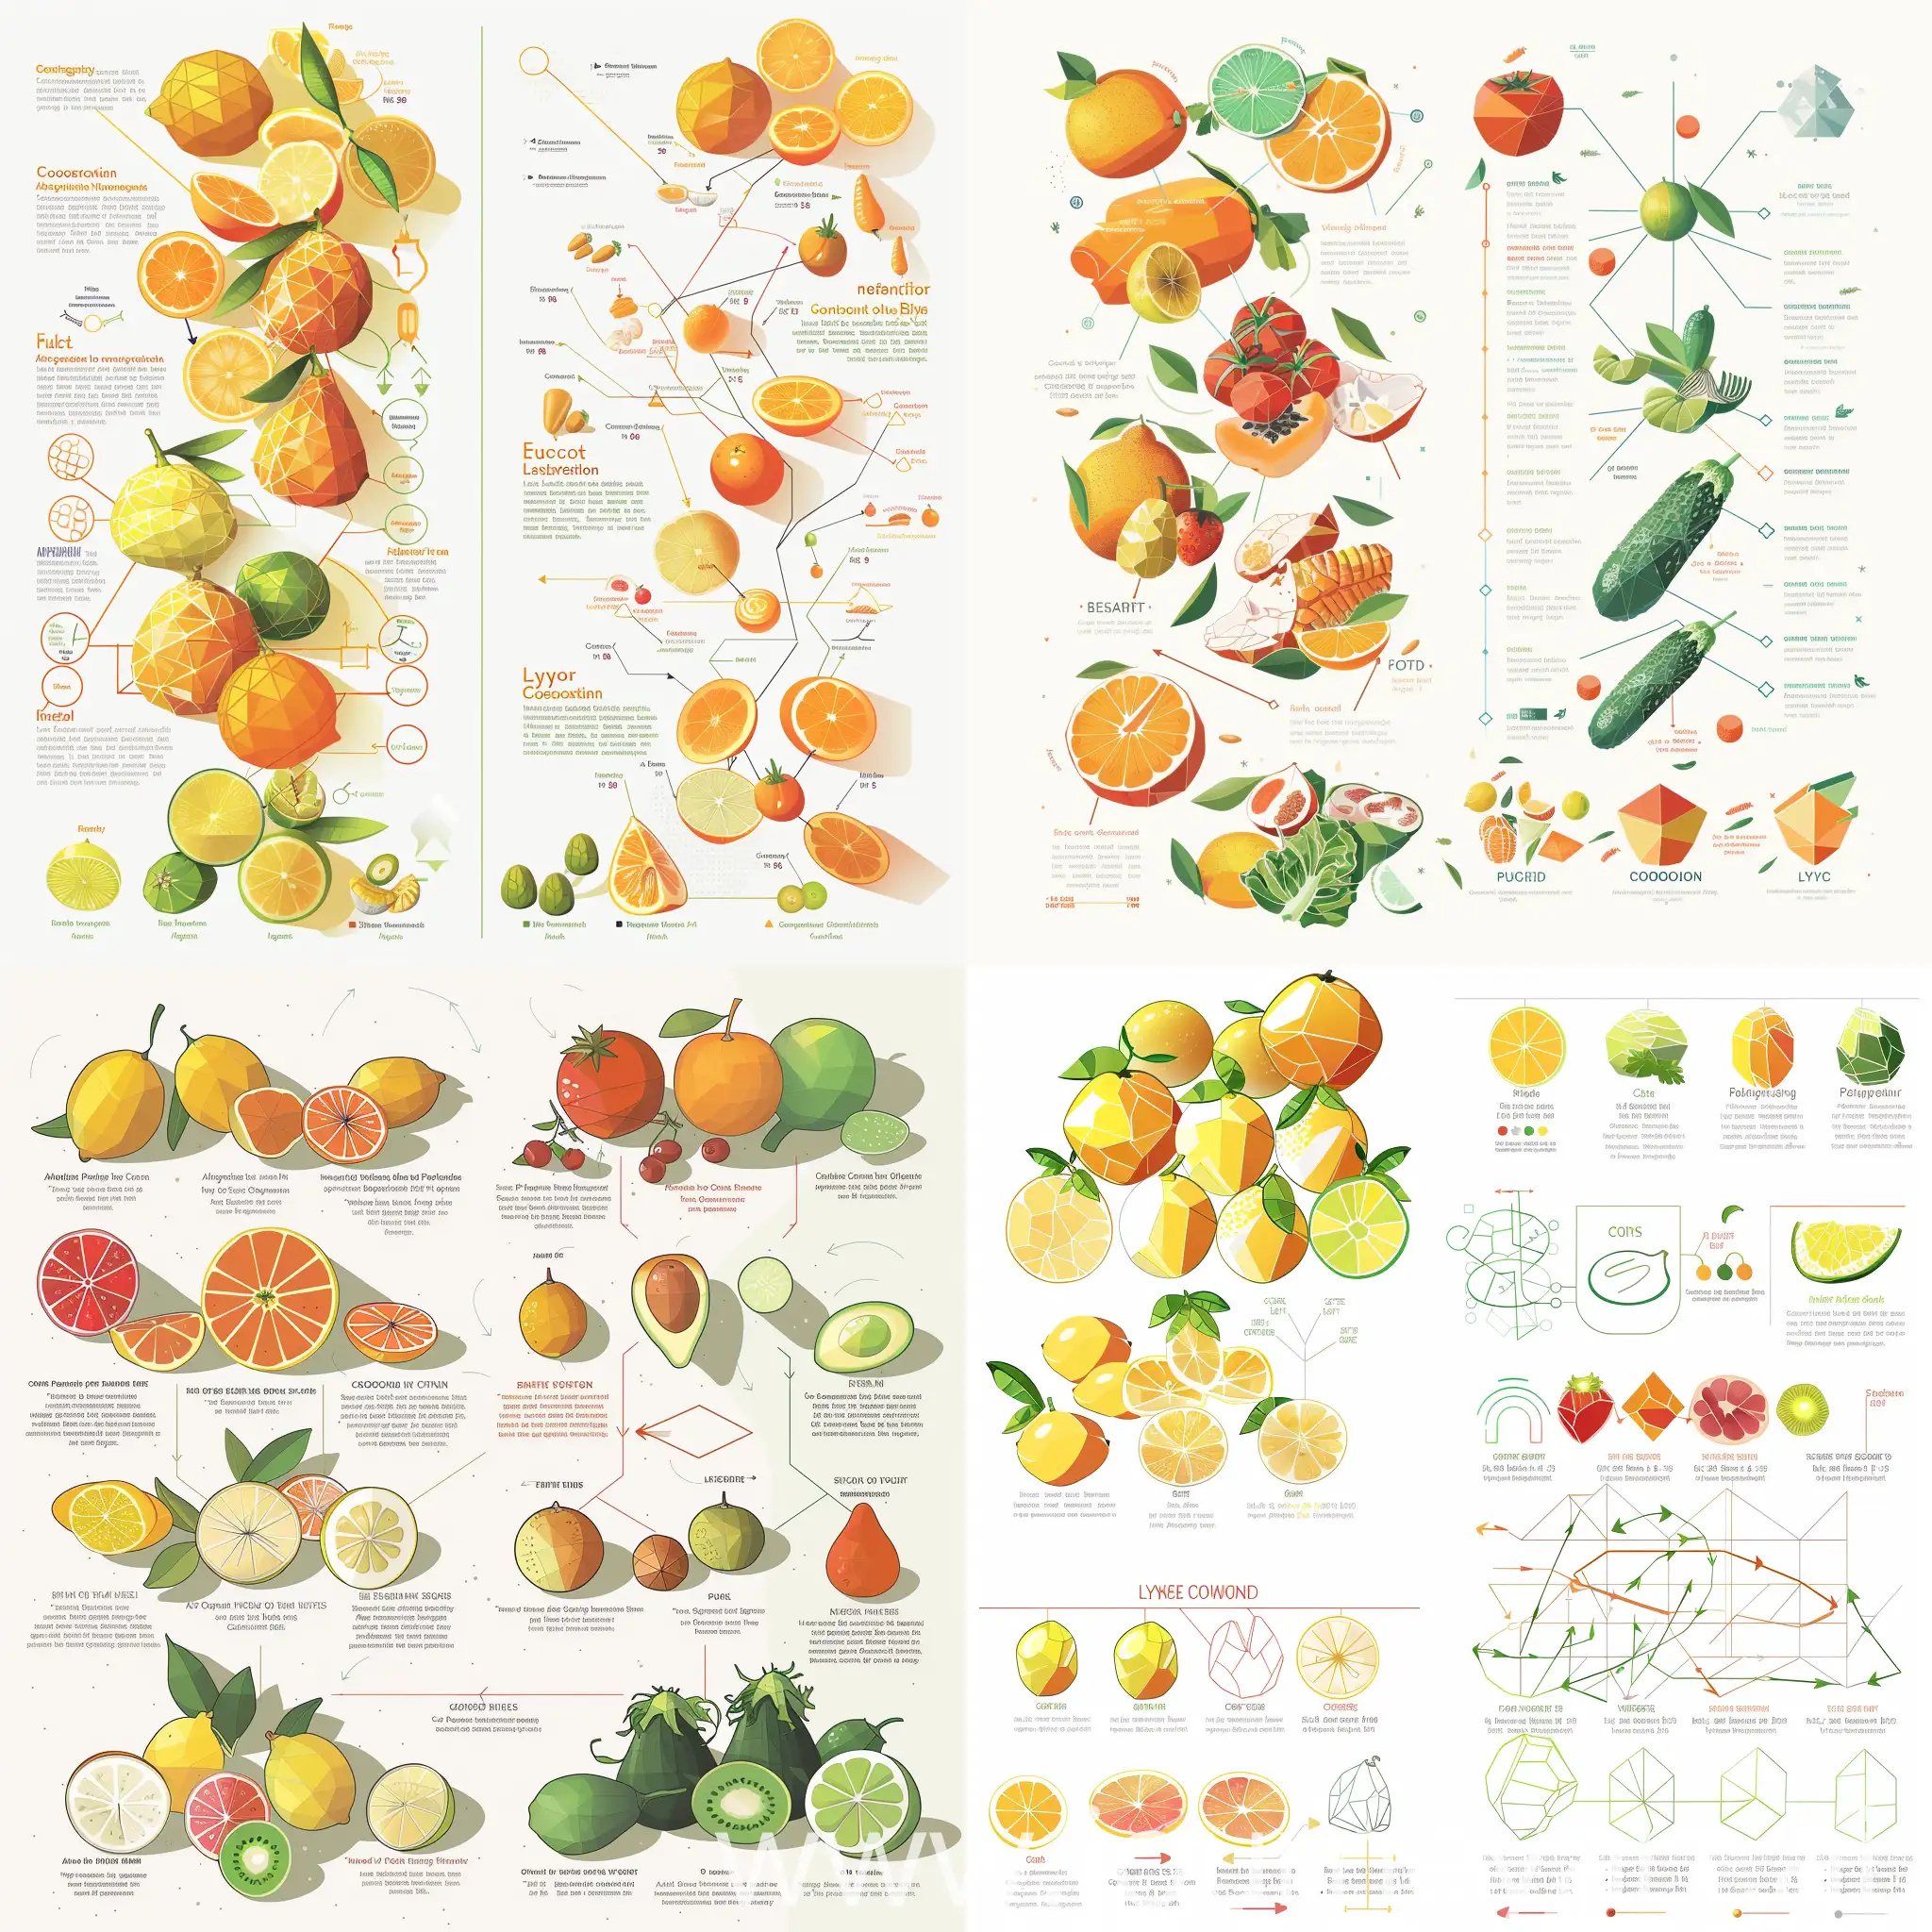 A clean and simple illustration of various citrus fruits on one side, and different carotenoid-rich vegetables and fruits on the other side, depicted in simplified geometric shapes with labels underneath. Use distinct colors like orange for beta-carotene, red for lycopene etc. Draw connecting lines or arrows between the foods and corresponding nutrients. Include a simple legend or text panel explaining the concept and relationships. The overall style should be flat, minimalist and unified.
